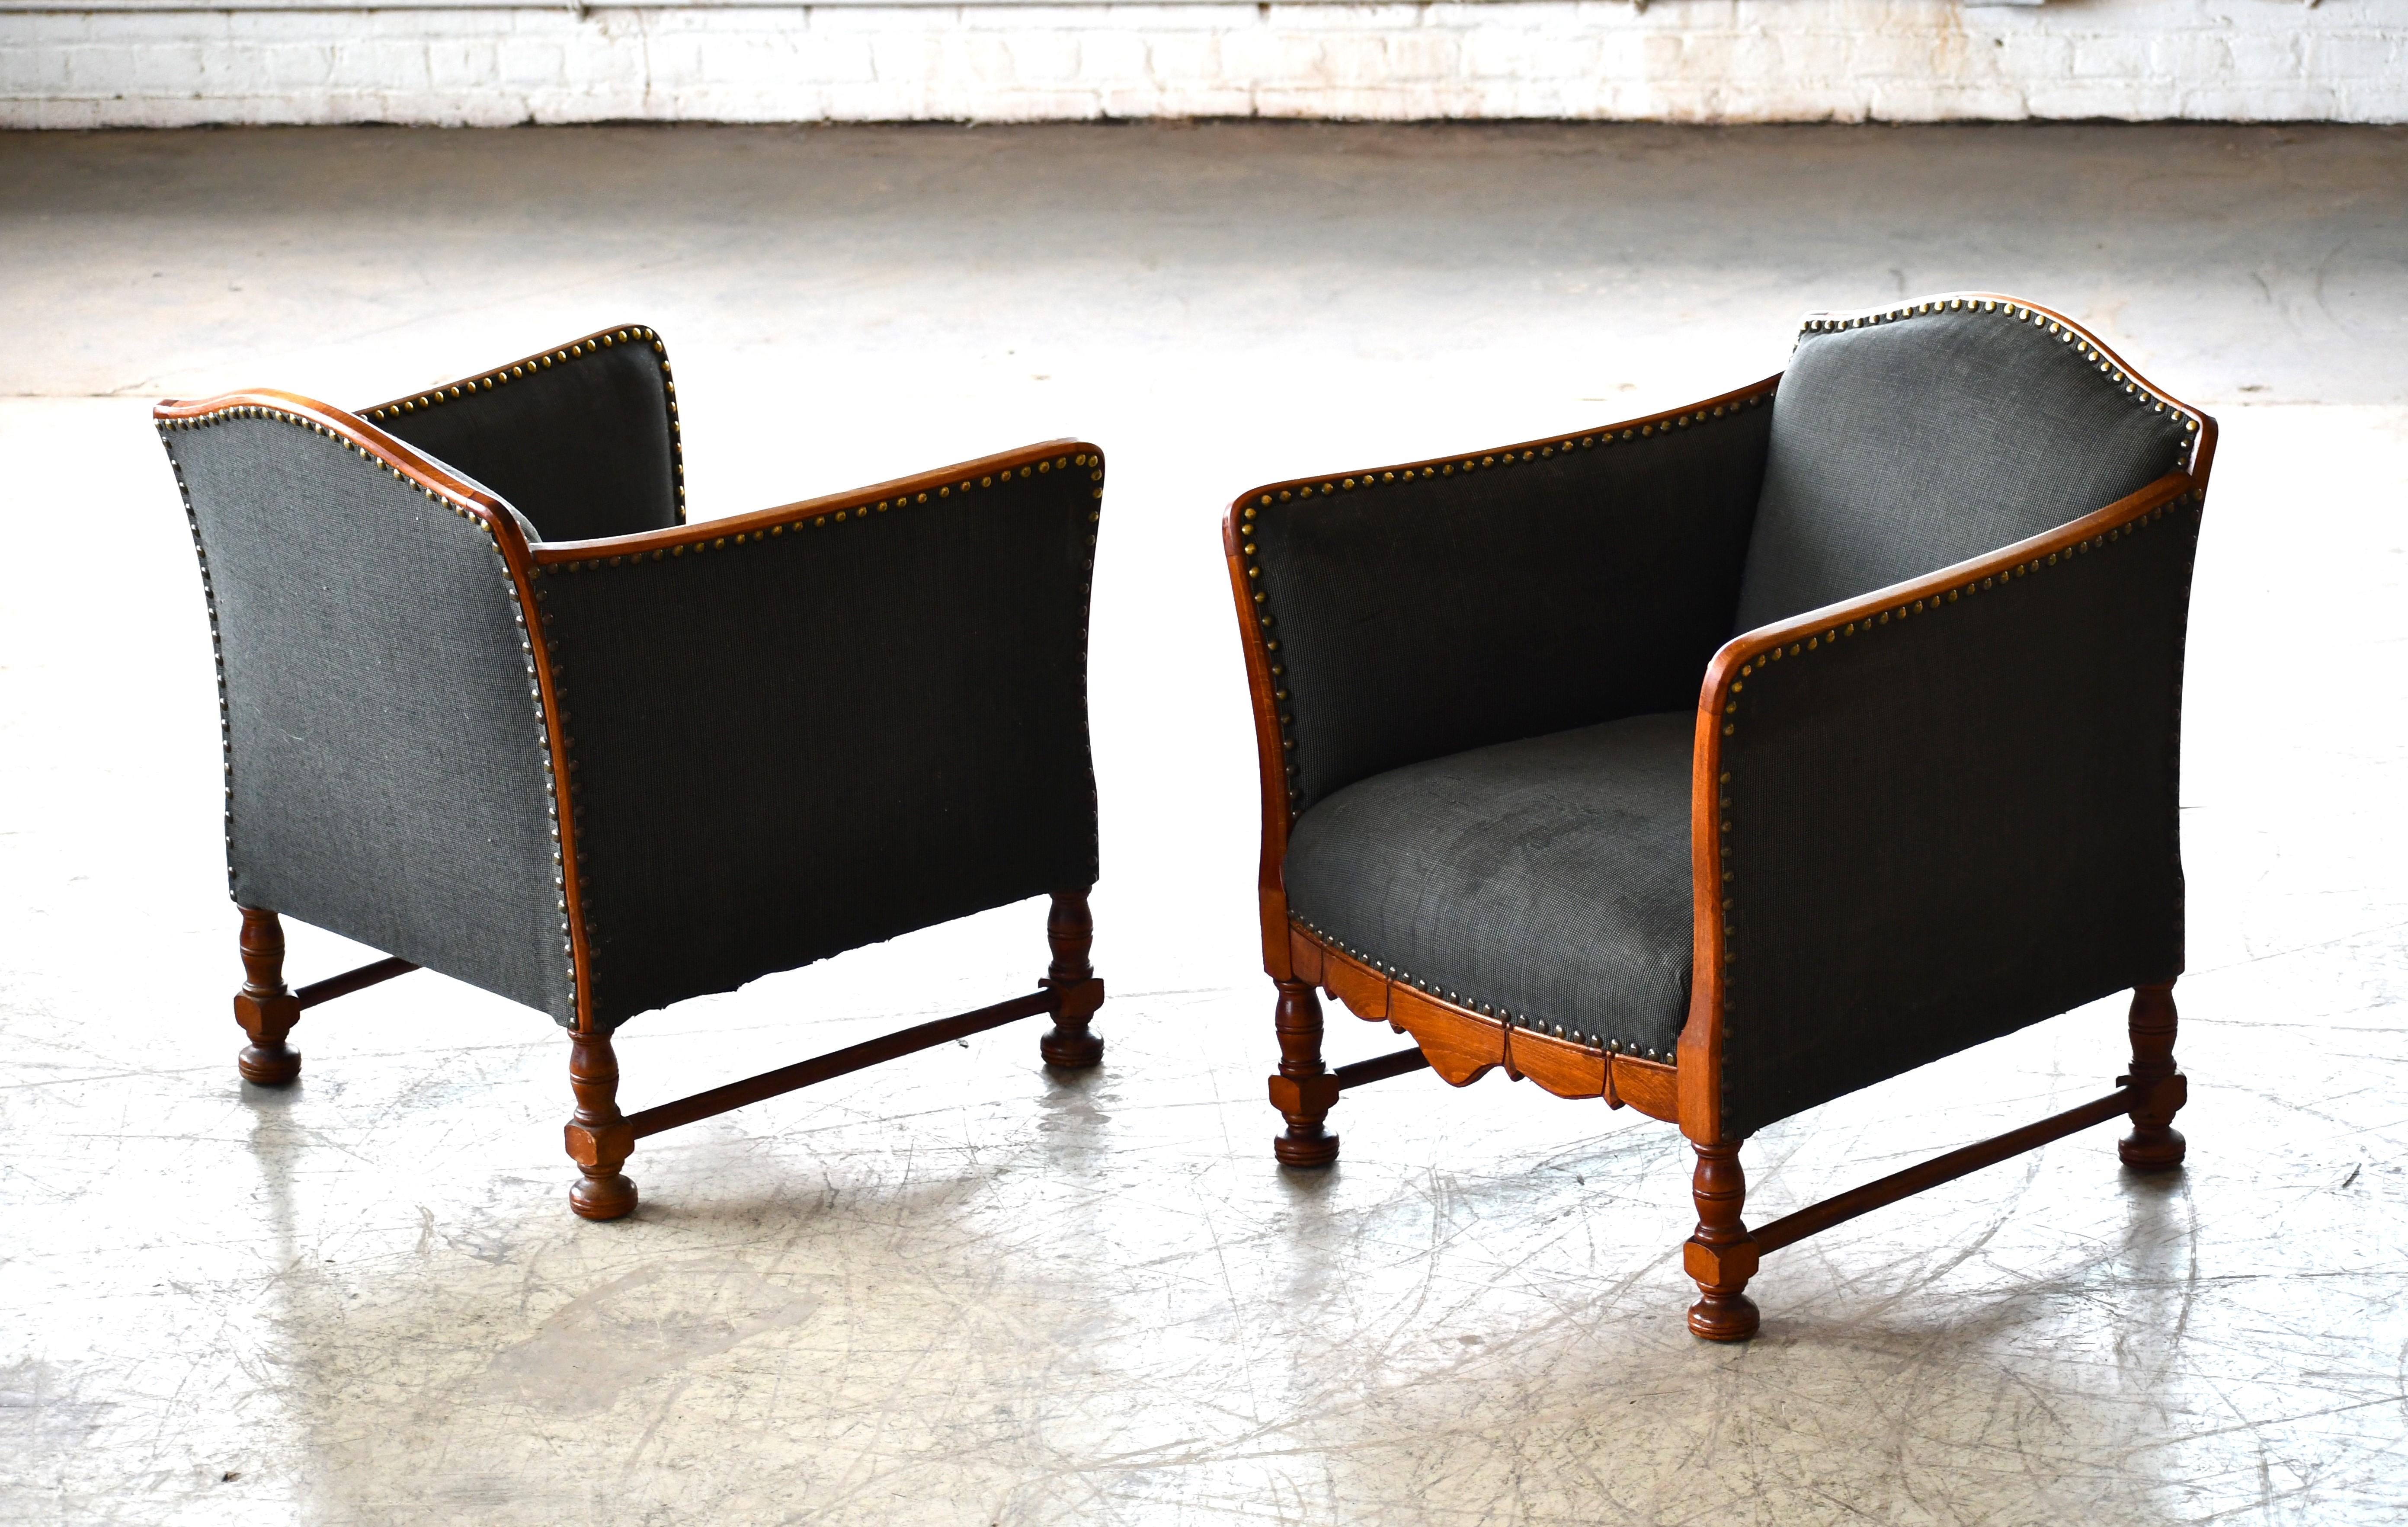 Danish Pair of Lounge Chairs with Carved Beech Wood Frames and Legs, Denmark 1930-40's